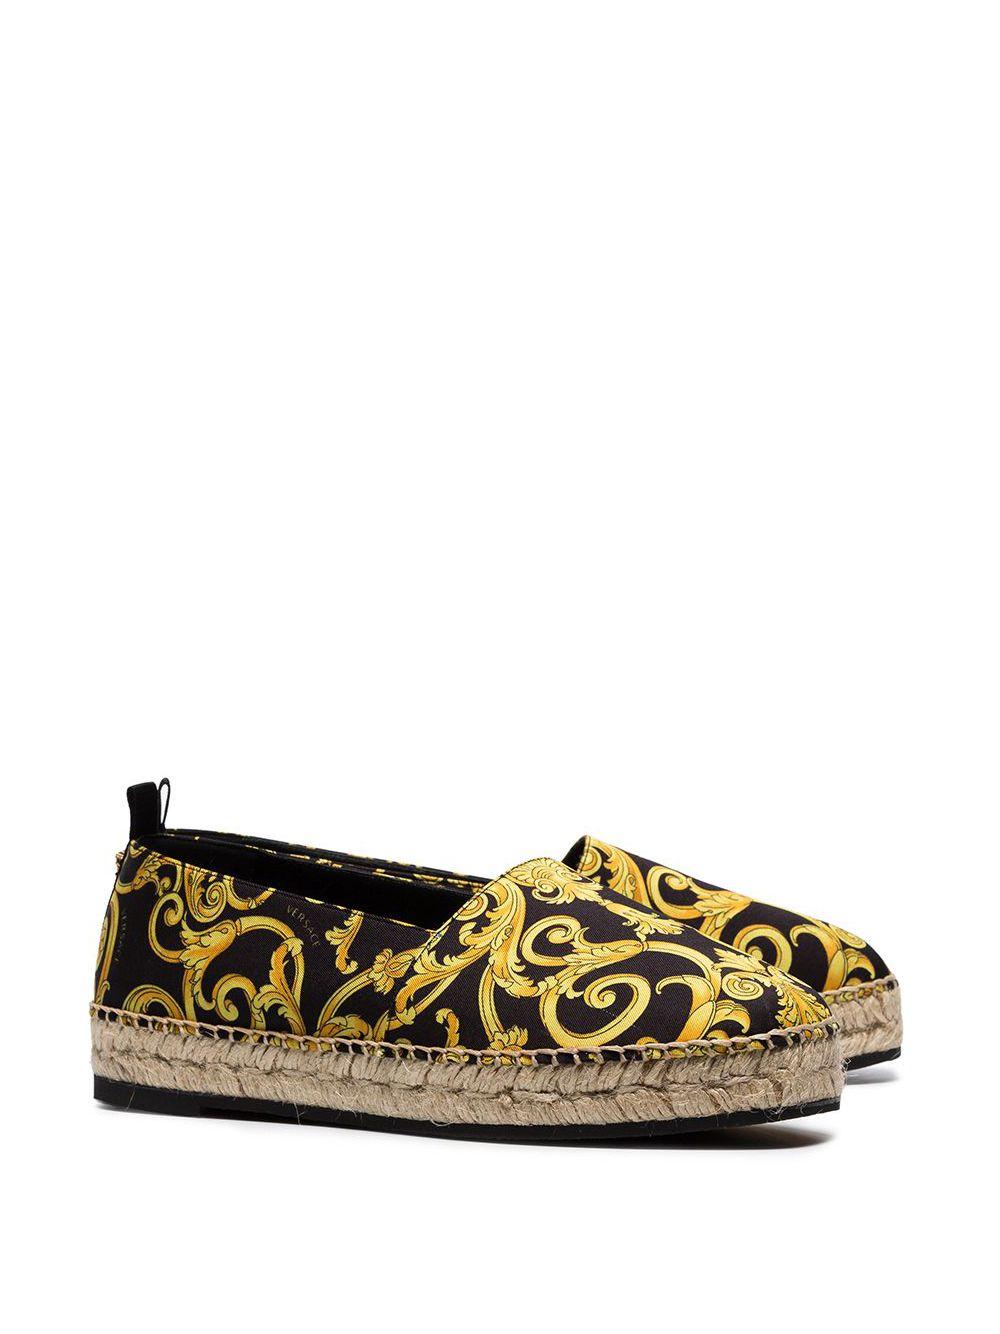 Versace Gold Hibiscus Barocco Espadrille Shoes w/ Braided Raffia Detail

Donatella pays tribute to her late brother Gianni Versace by bringing his original designs back to the forefront of the label. Archival prints, iconic motifs and retro-inspired